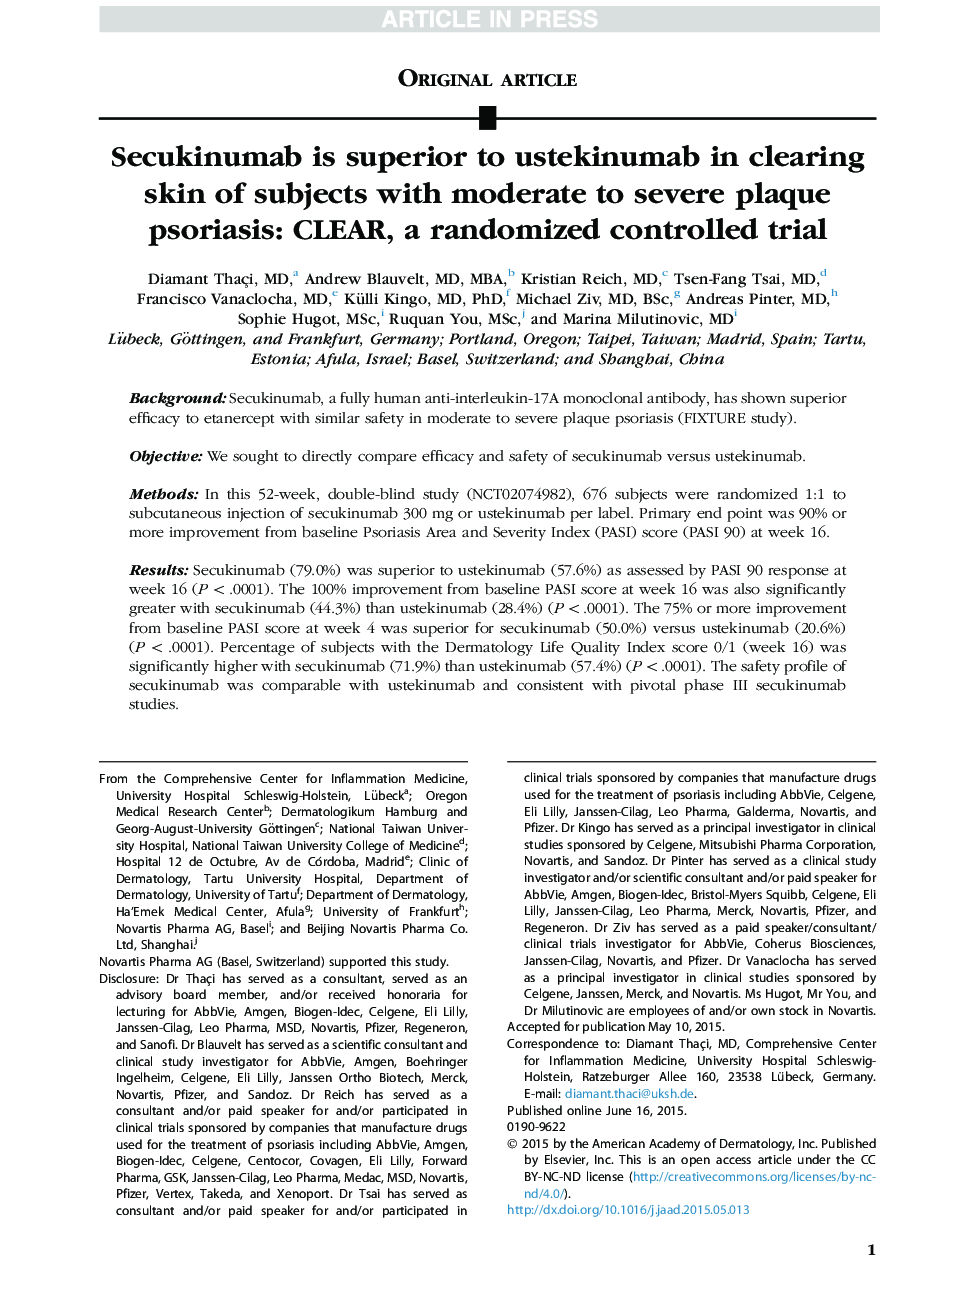 Secukinumab is superior to ustekinumab in clearing skin of subjects with moderate to severe plaque psoriasis: CLEAR, a randomized controlled trial